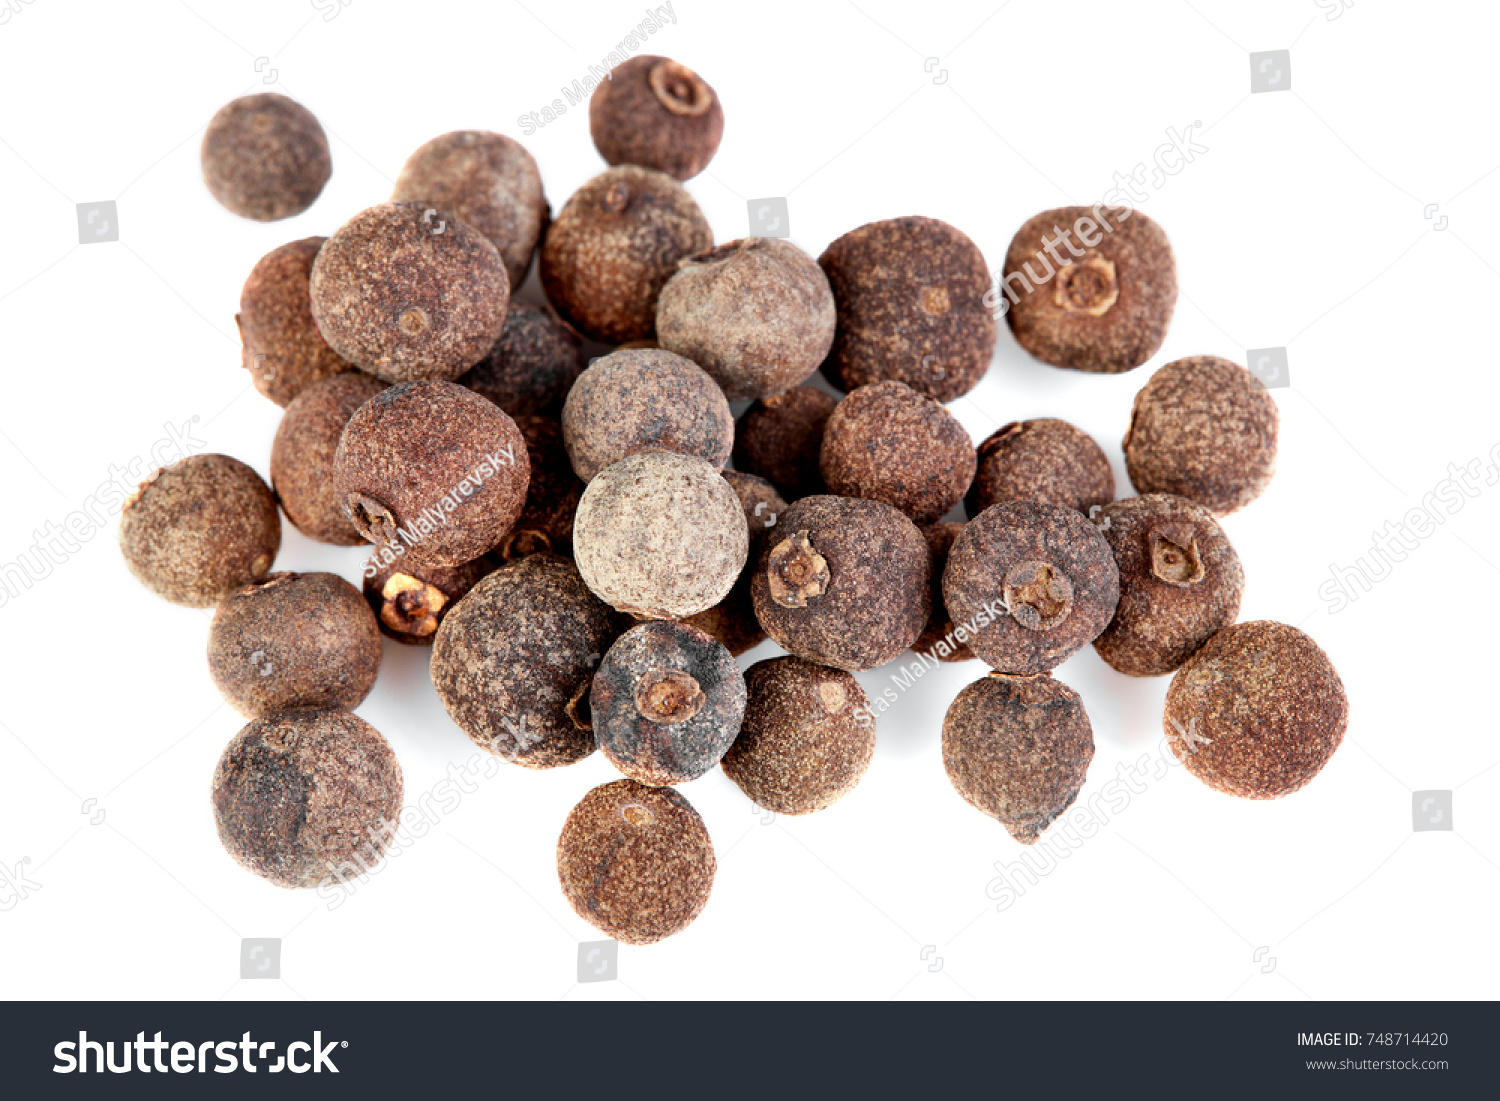 whole allspice isolated on white background. Aromatic allspice. #748714420